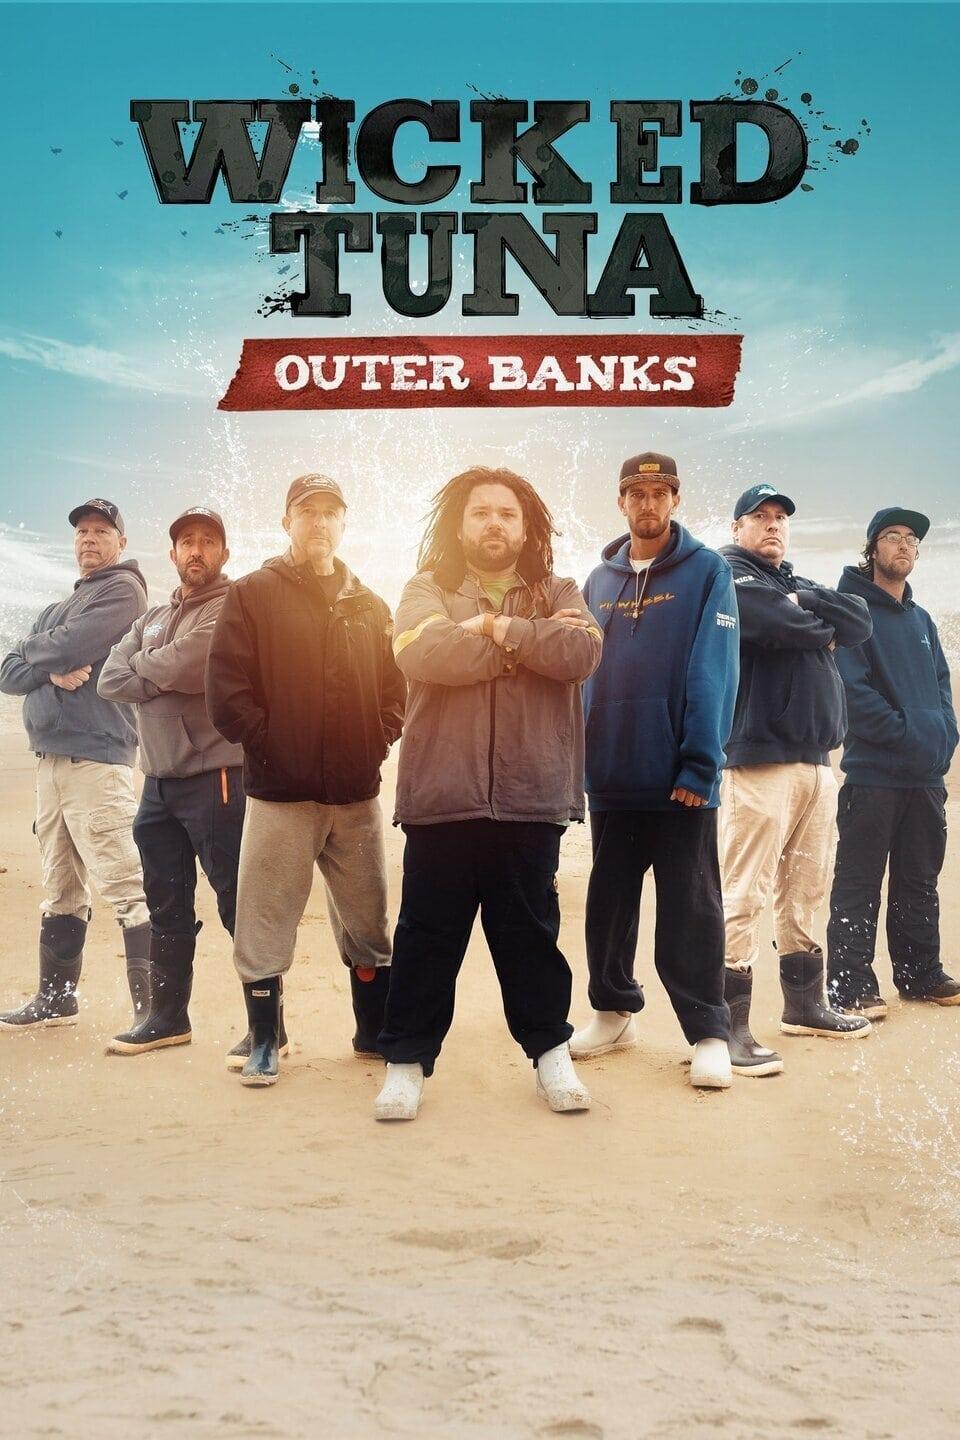 Wicked Tuna: Outer Banks poster